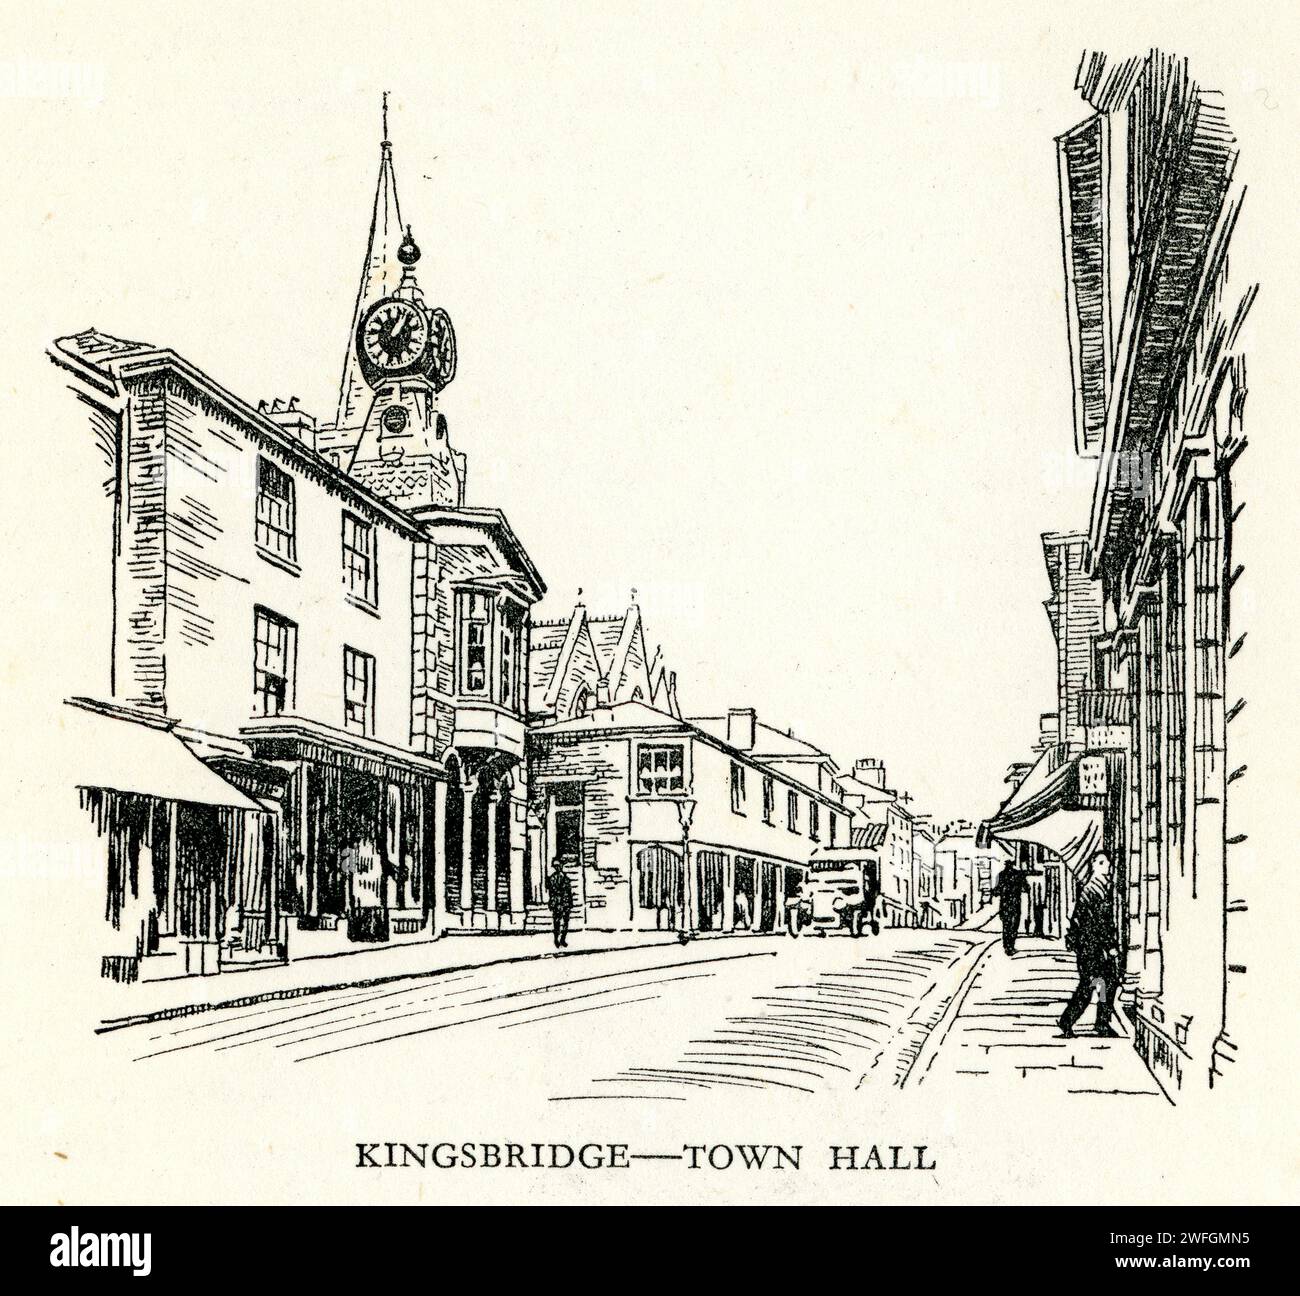 Pen and ink sketch - Kingsbridge town hall.  From the book Glorious Devon.  by S.P.B. Mais, published by London Great Western Railway Company, 1928 Stock Photo